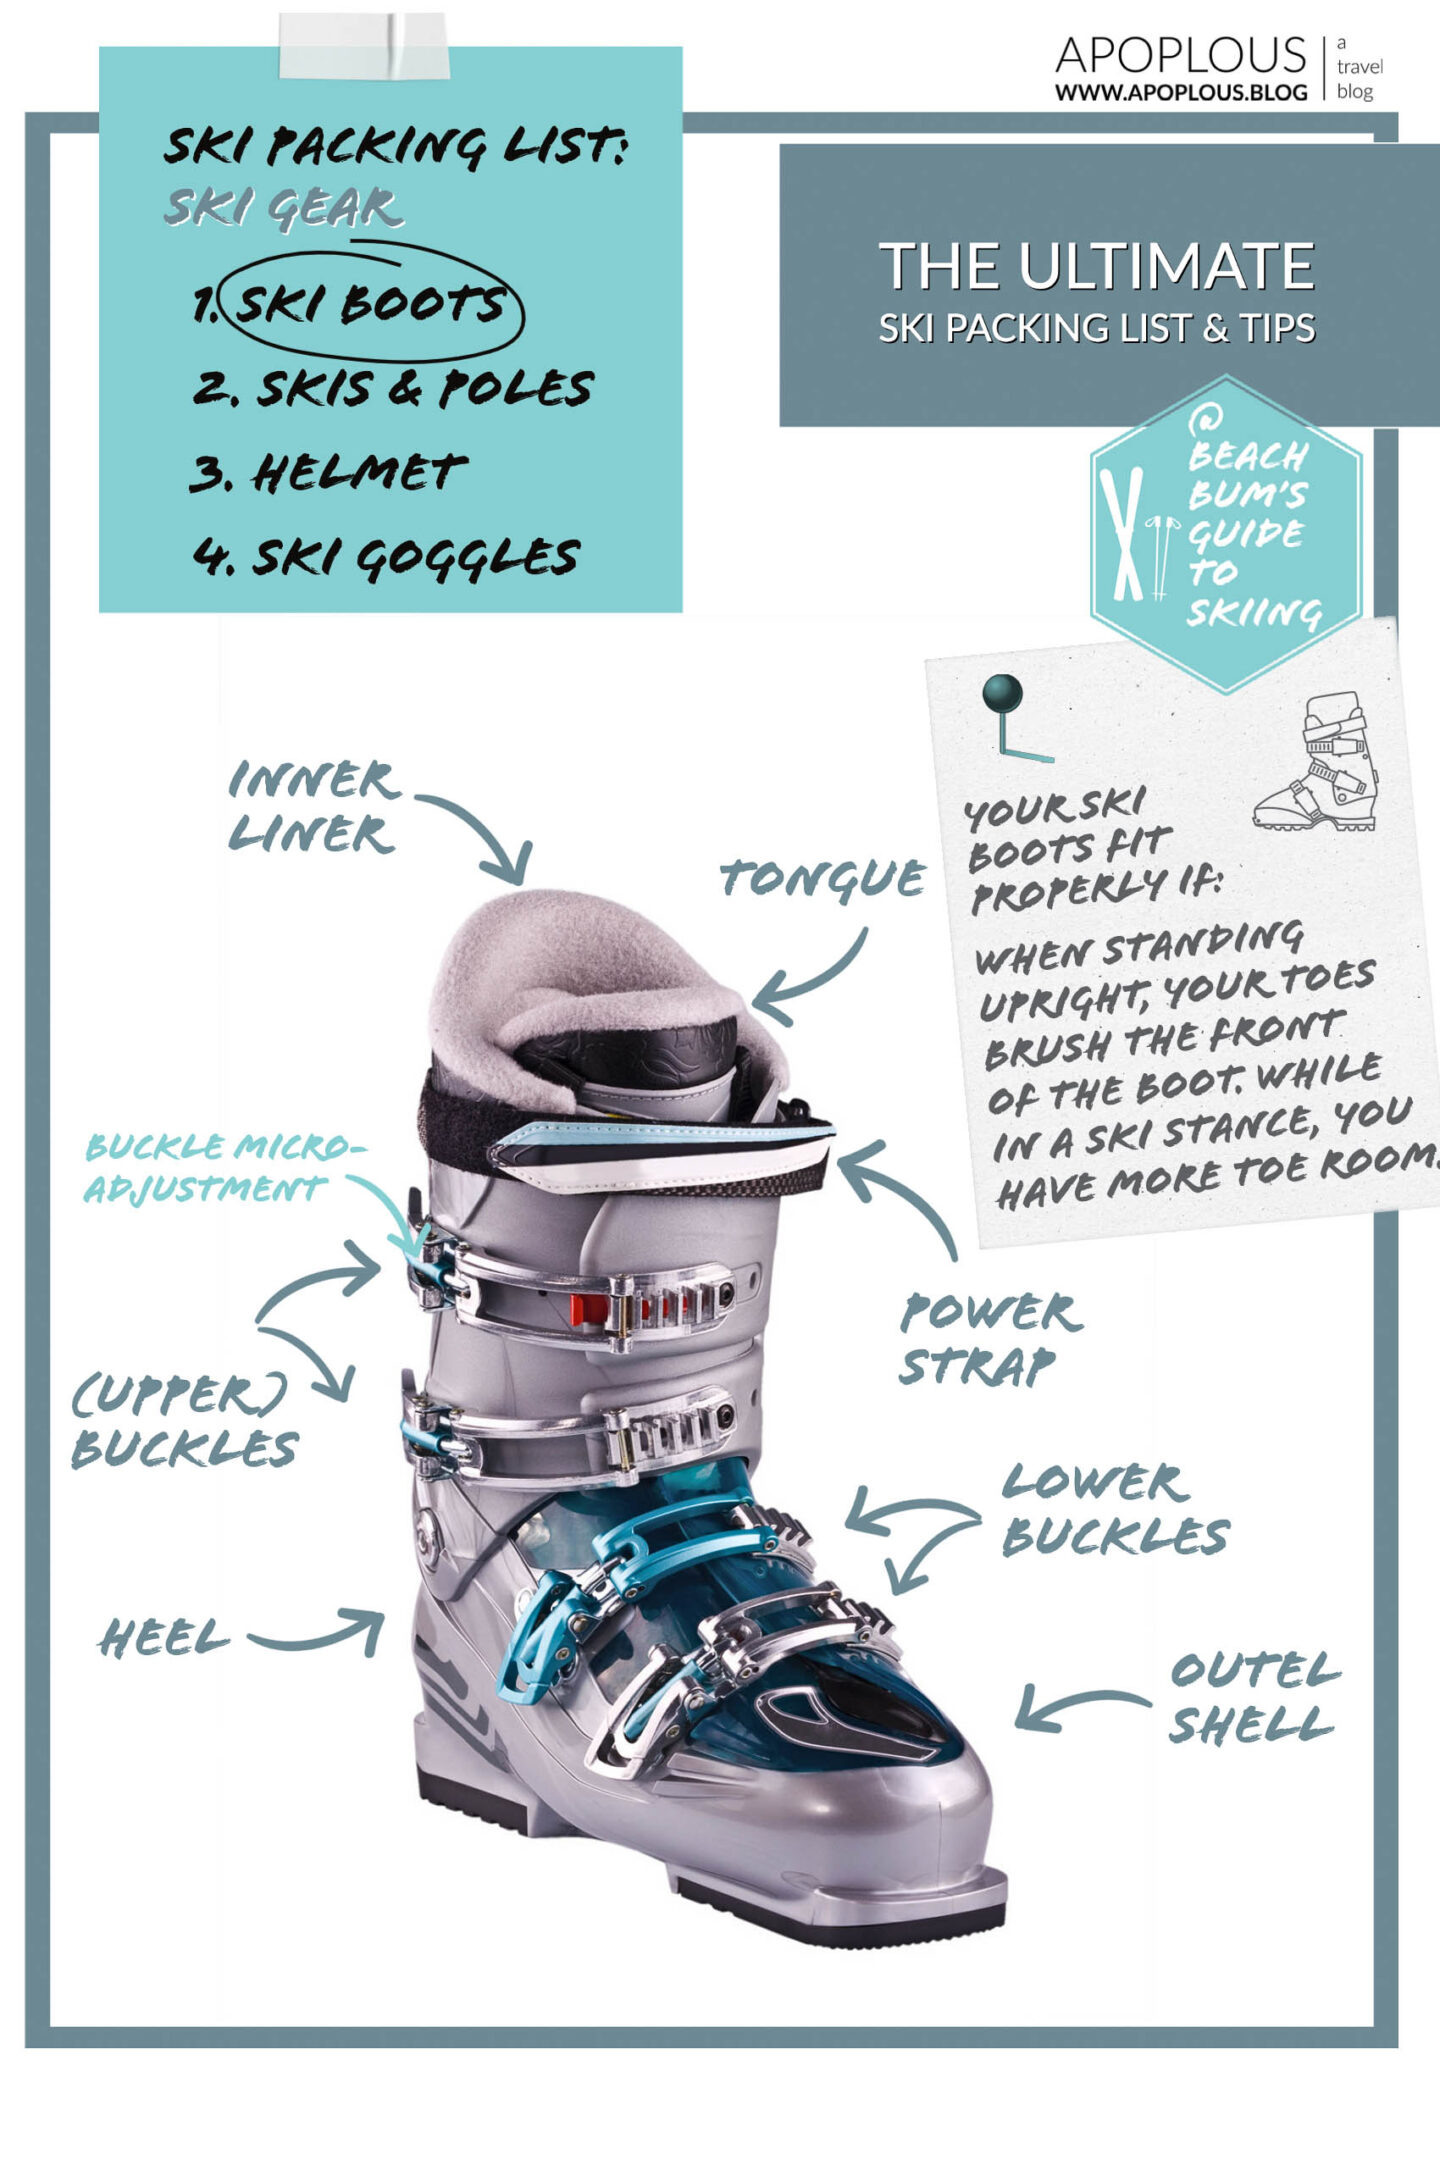 How to wear ski boots pain free: Tips for all day comfort